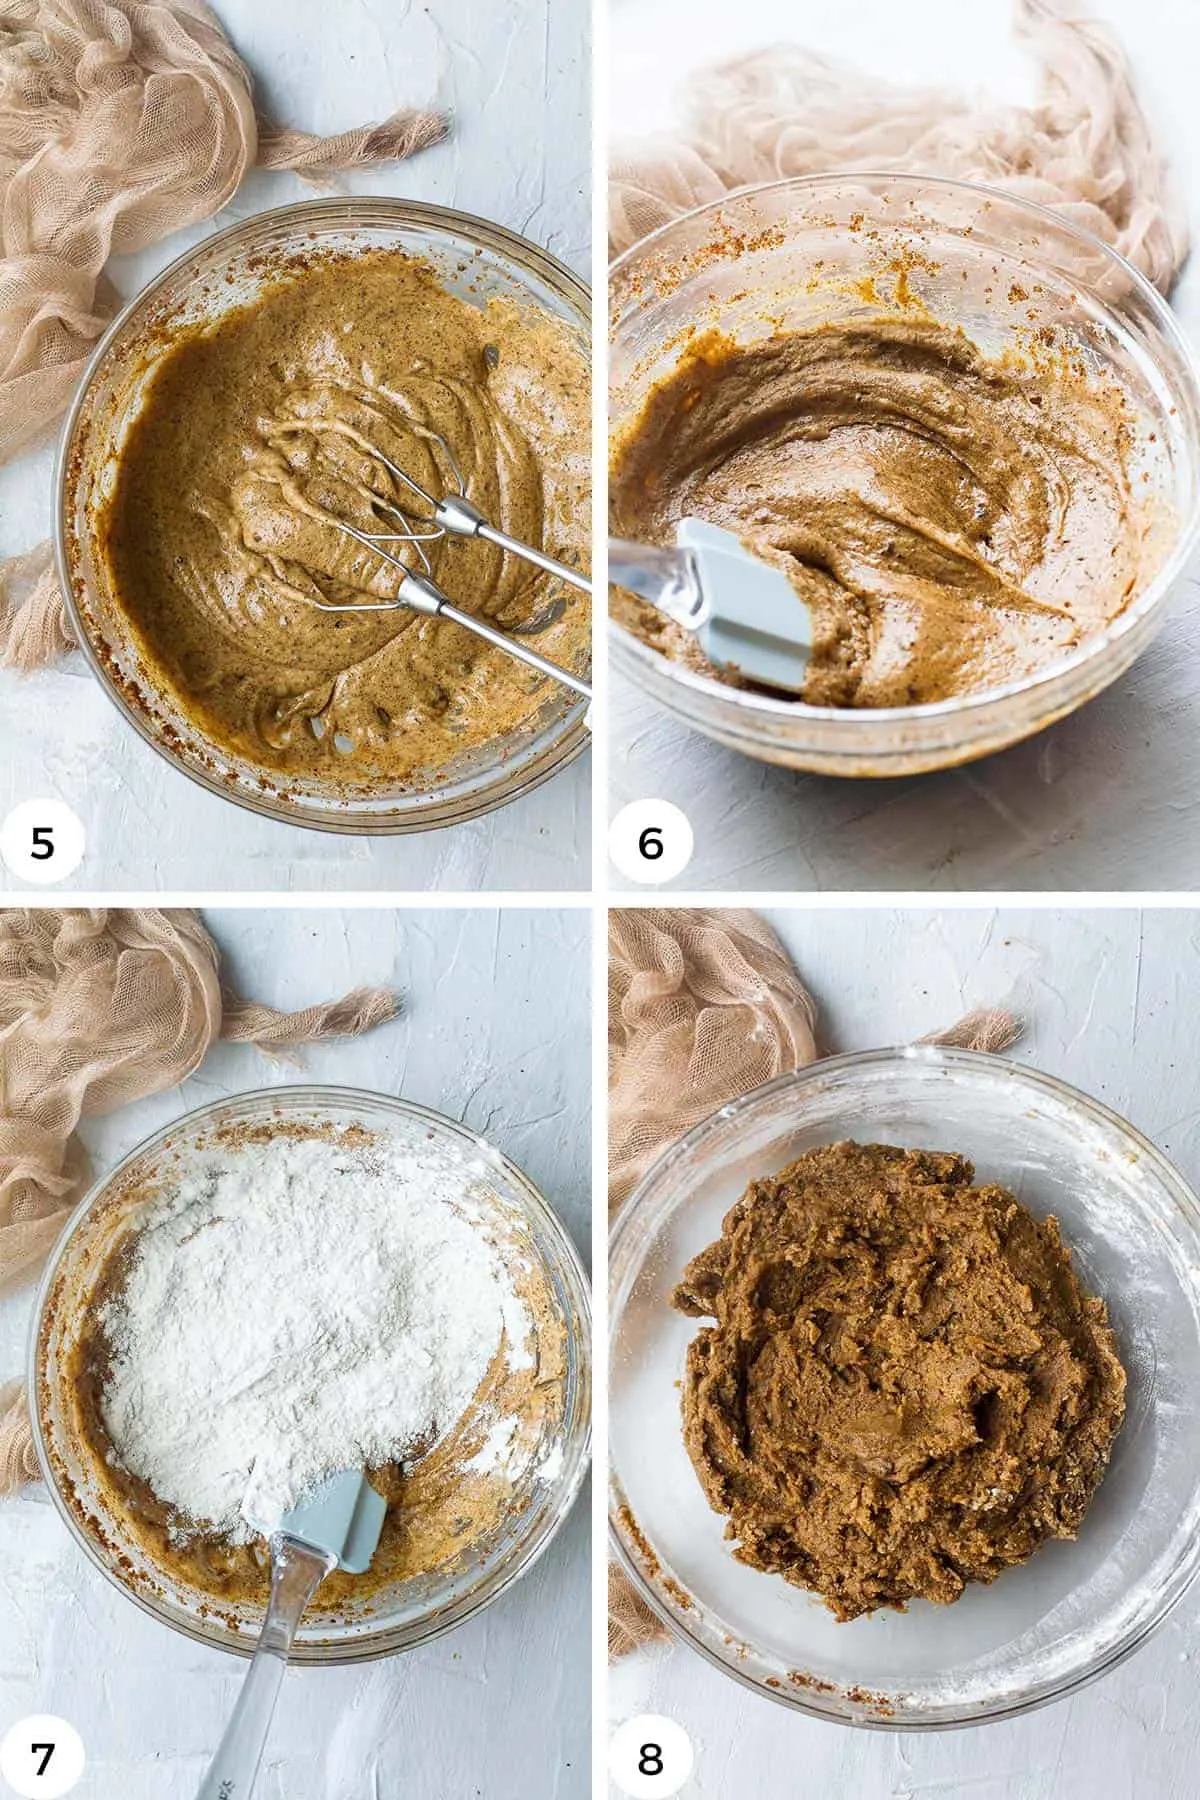 The next 4 steps to make the cookie dough.